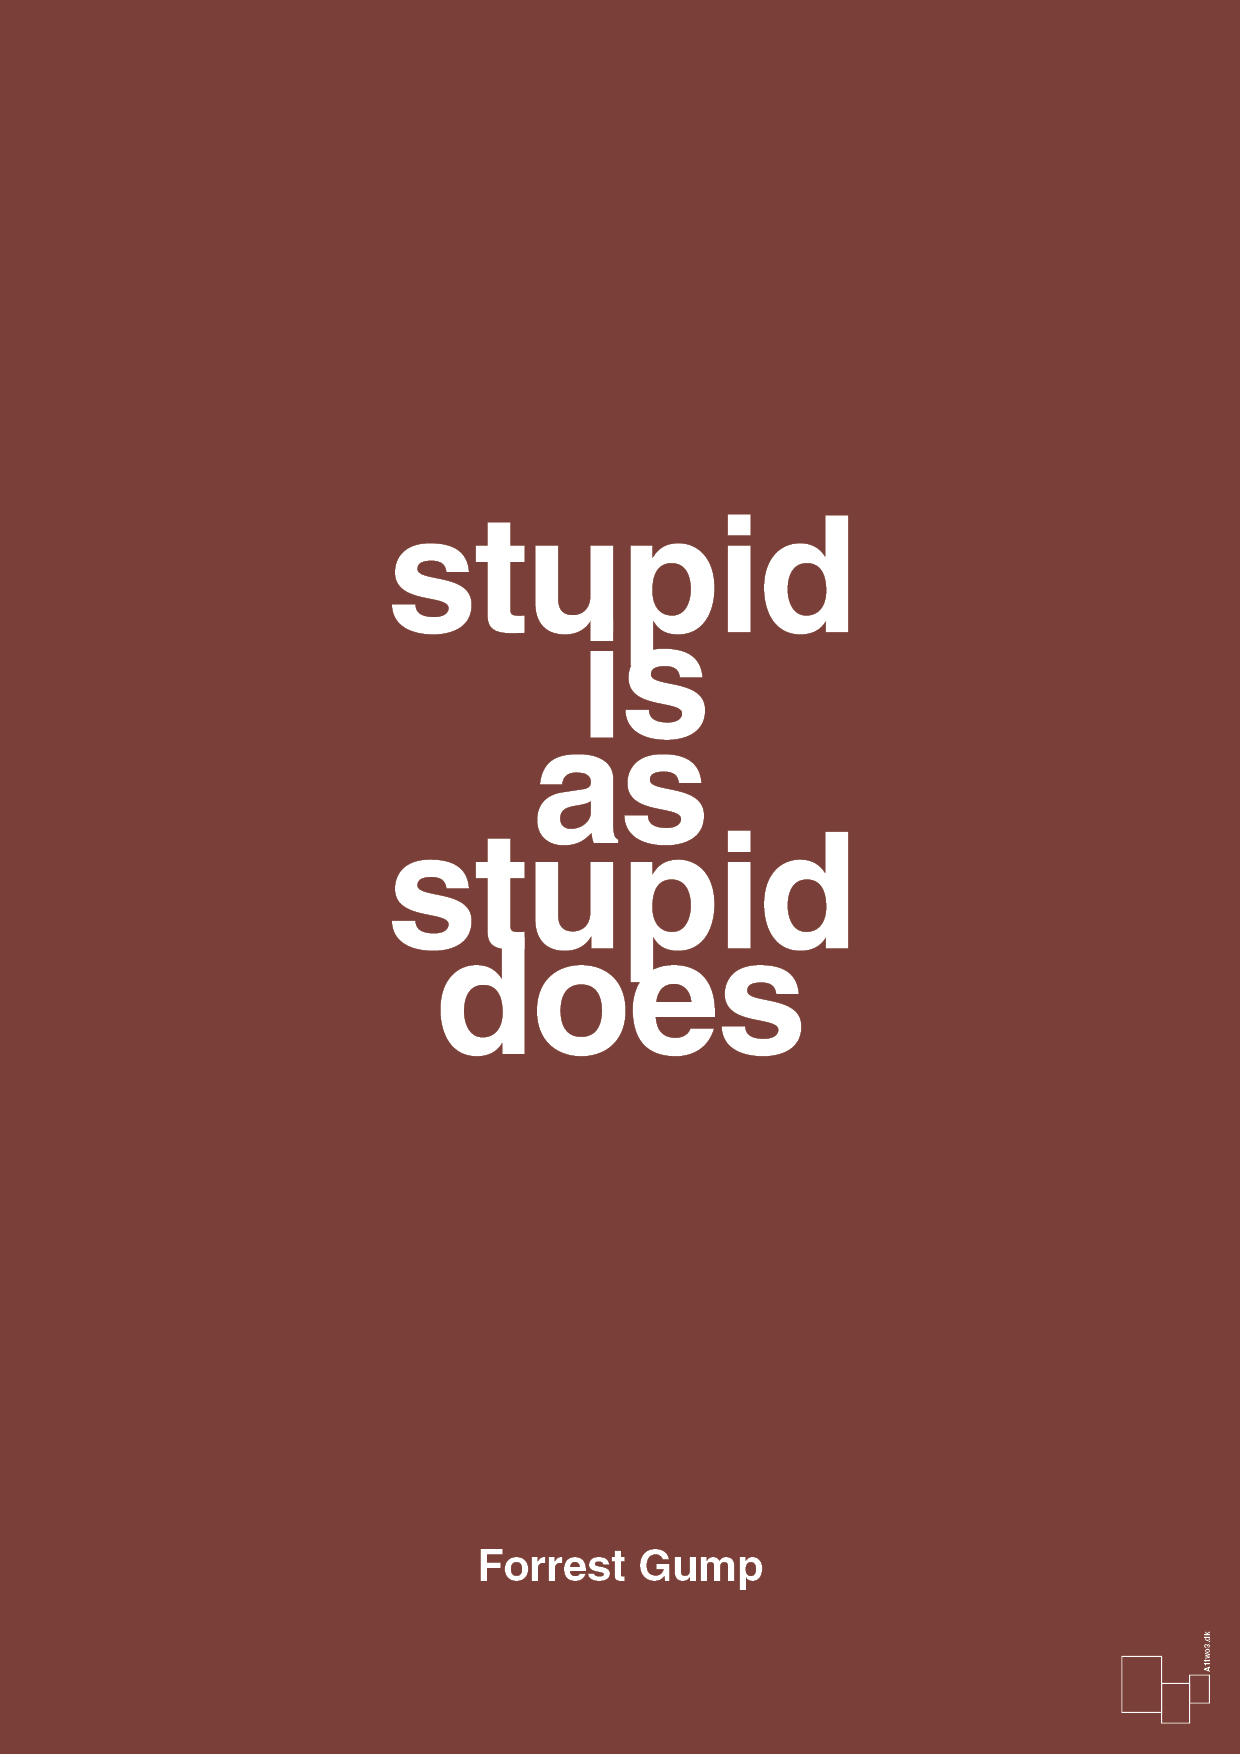 stupid is as stupid does - Plakat med Citater i Red Pepper